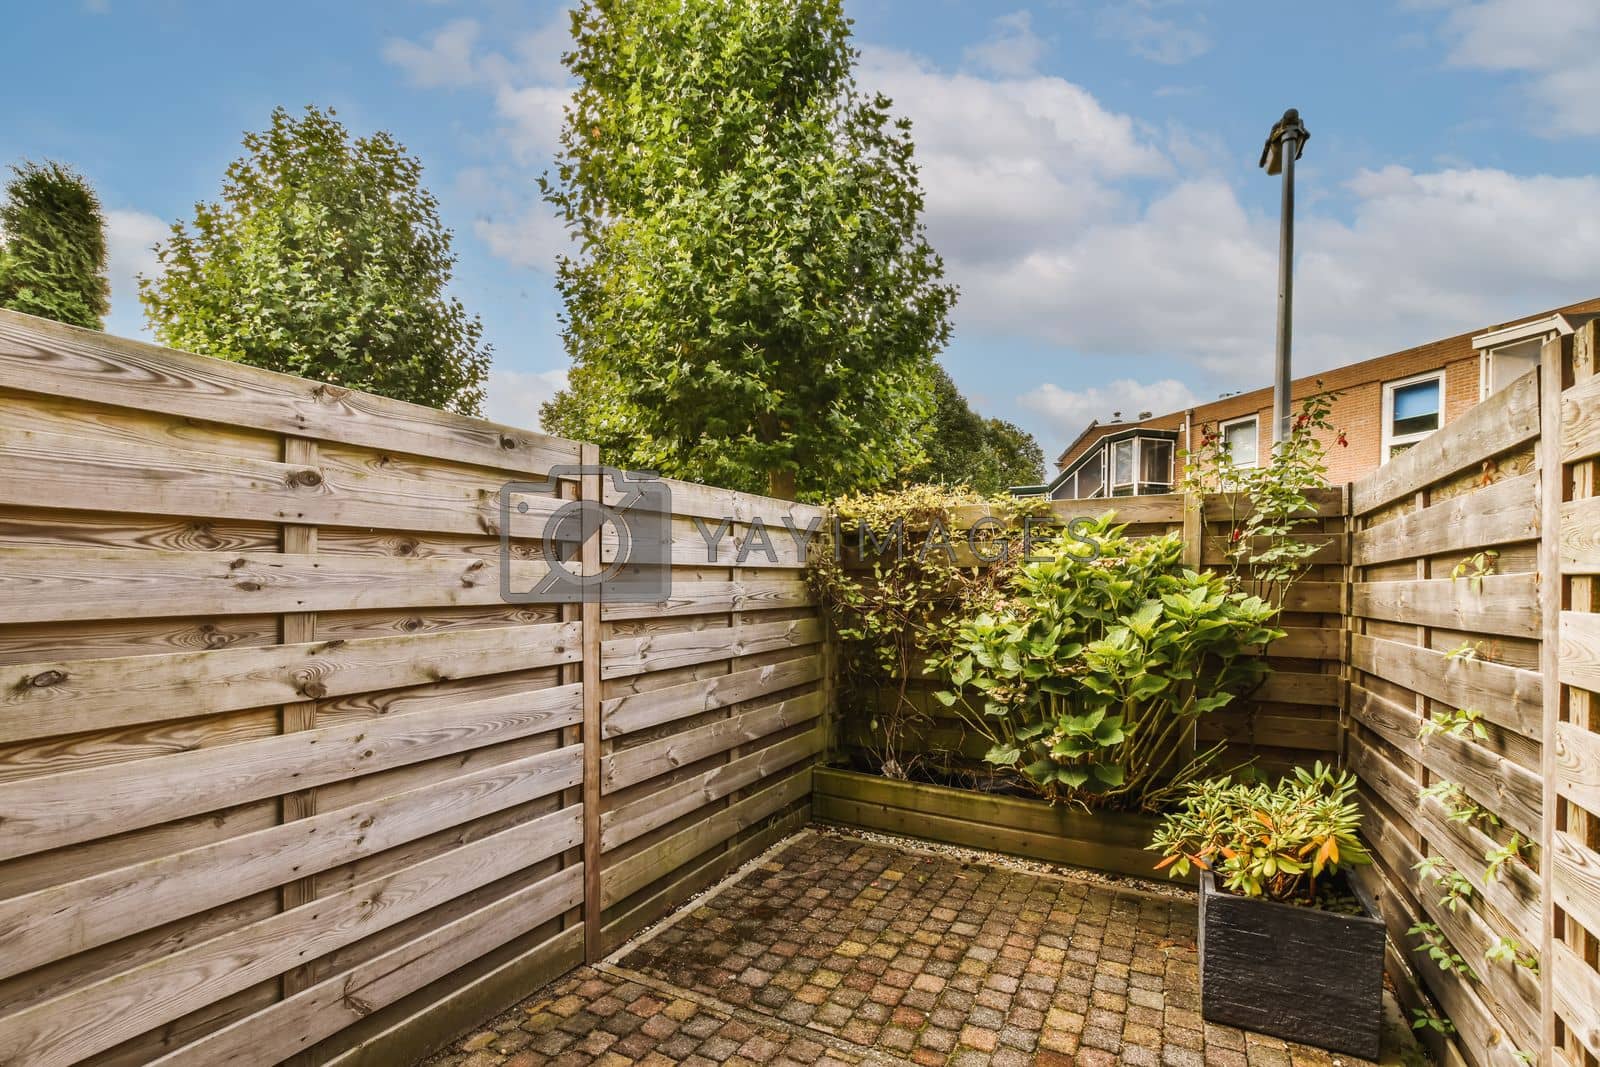 Royalty free image of a backyard with a wooden fence and a brick patio by casamedia